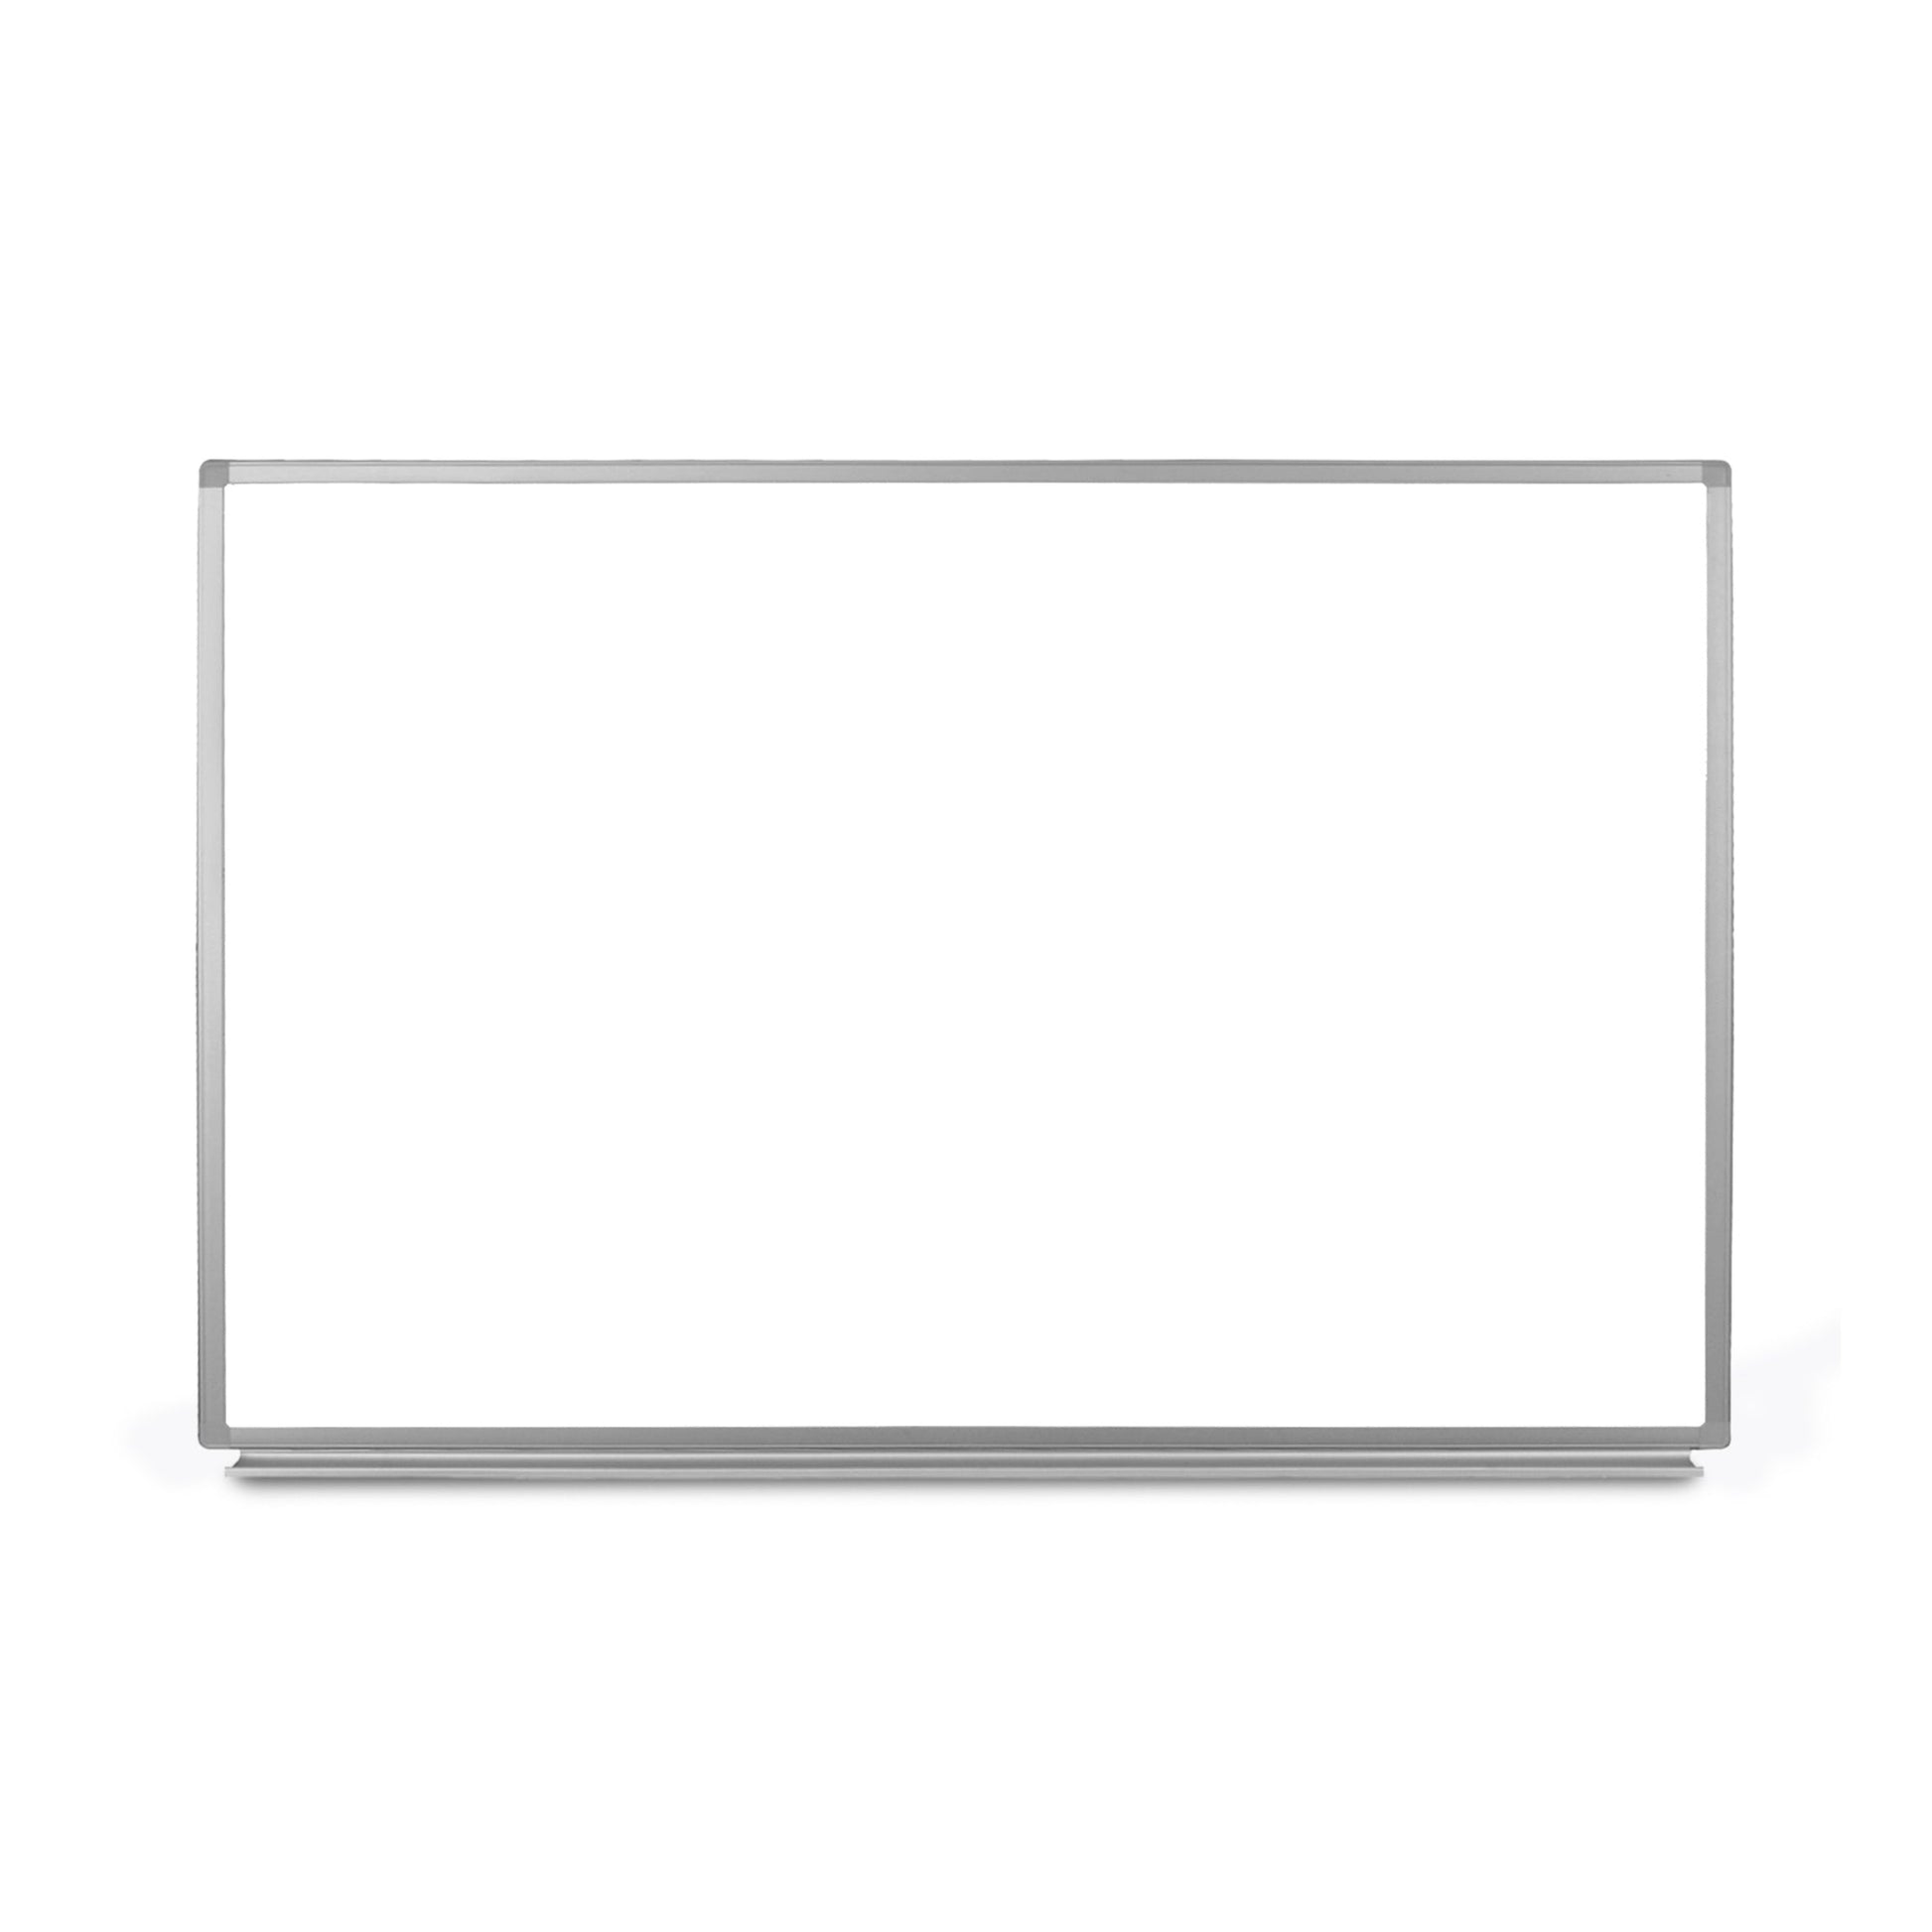 Luxor WB3624W - Wall-mounted Whiteboard 36"W x 24"H (LUX-WB3624W) - SchoolOutlet